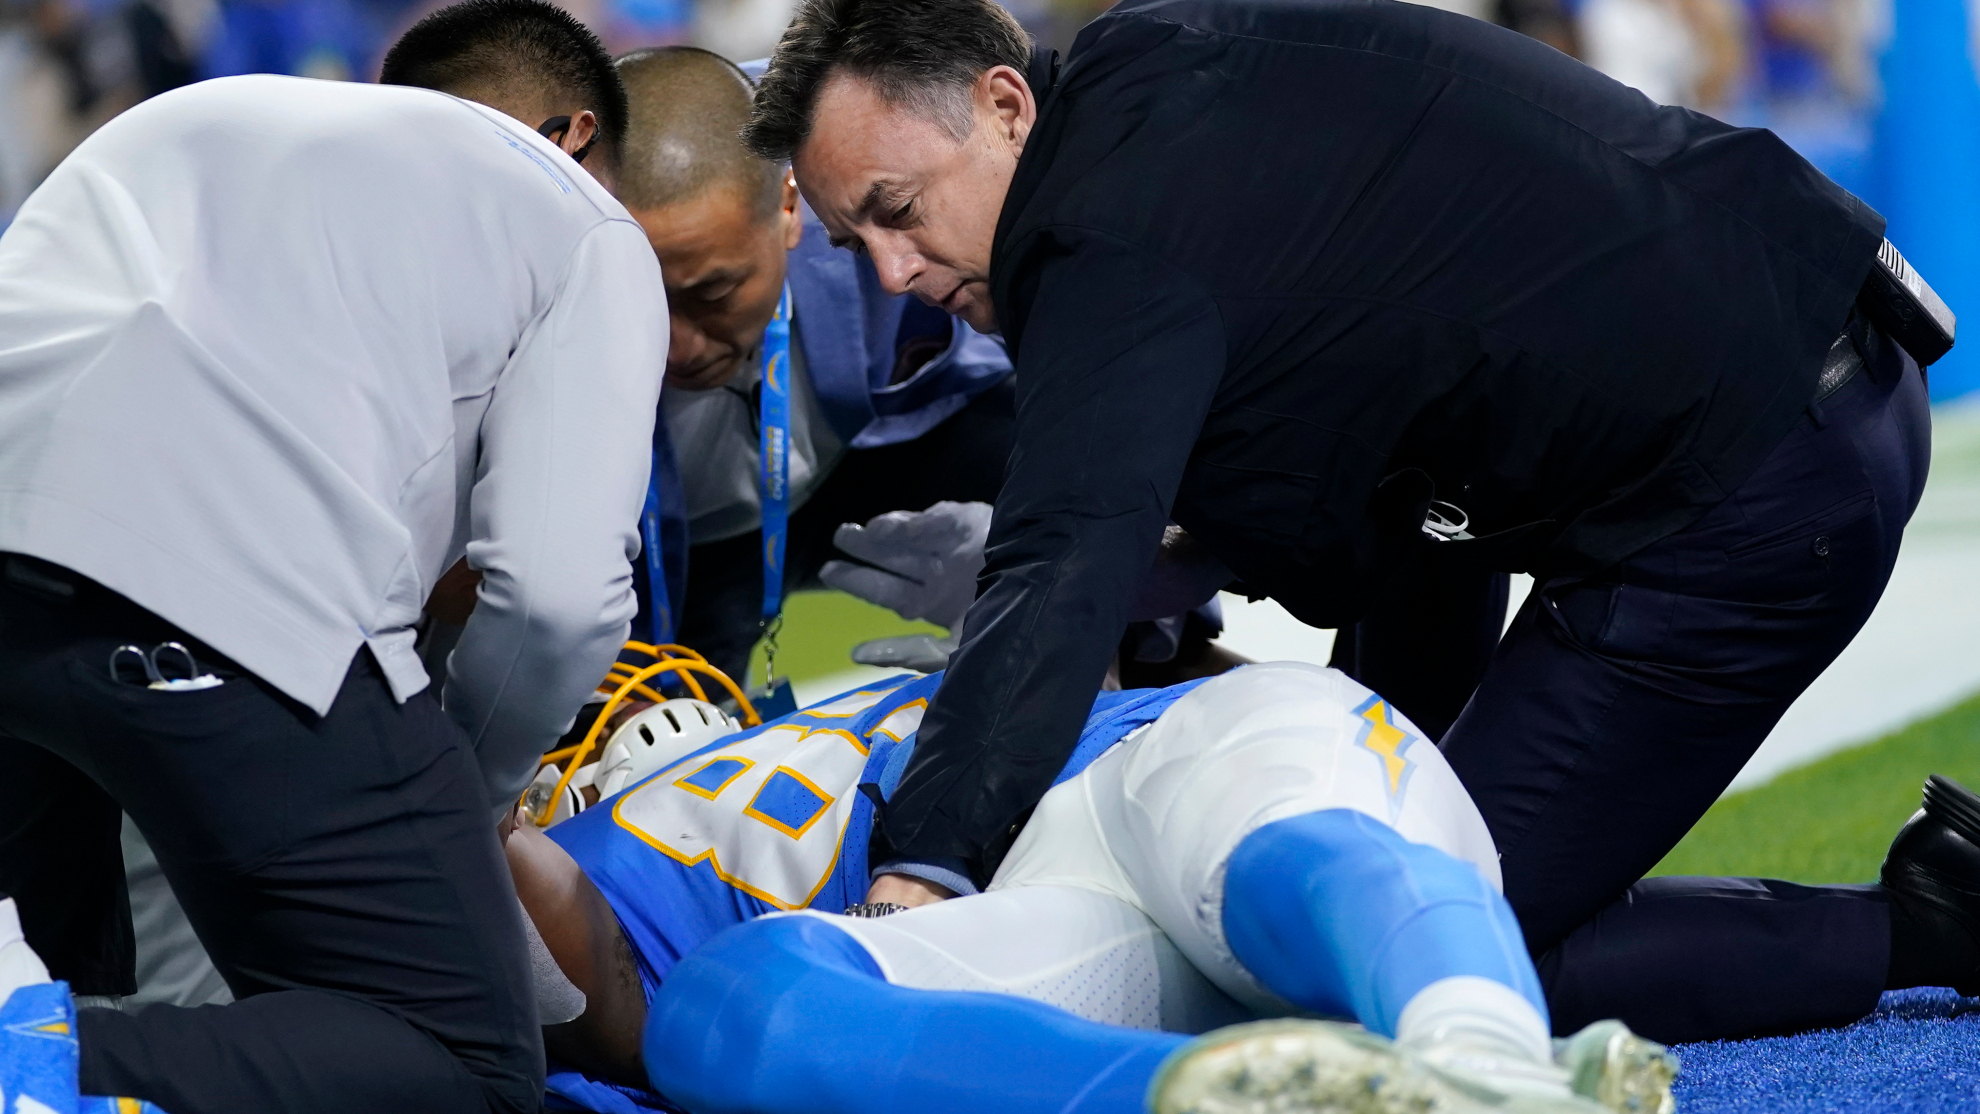 chargers injuries today